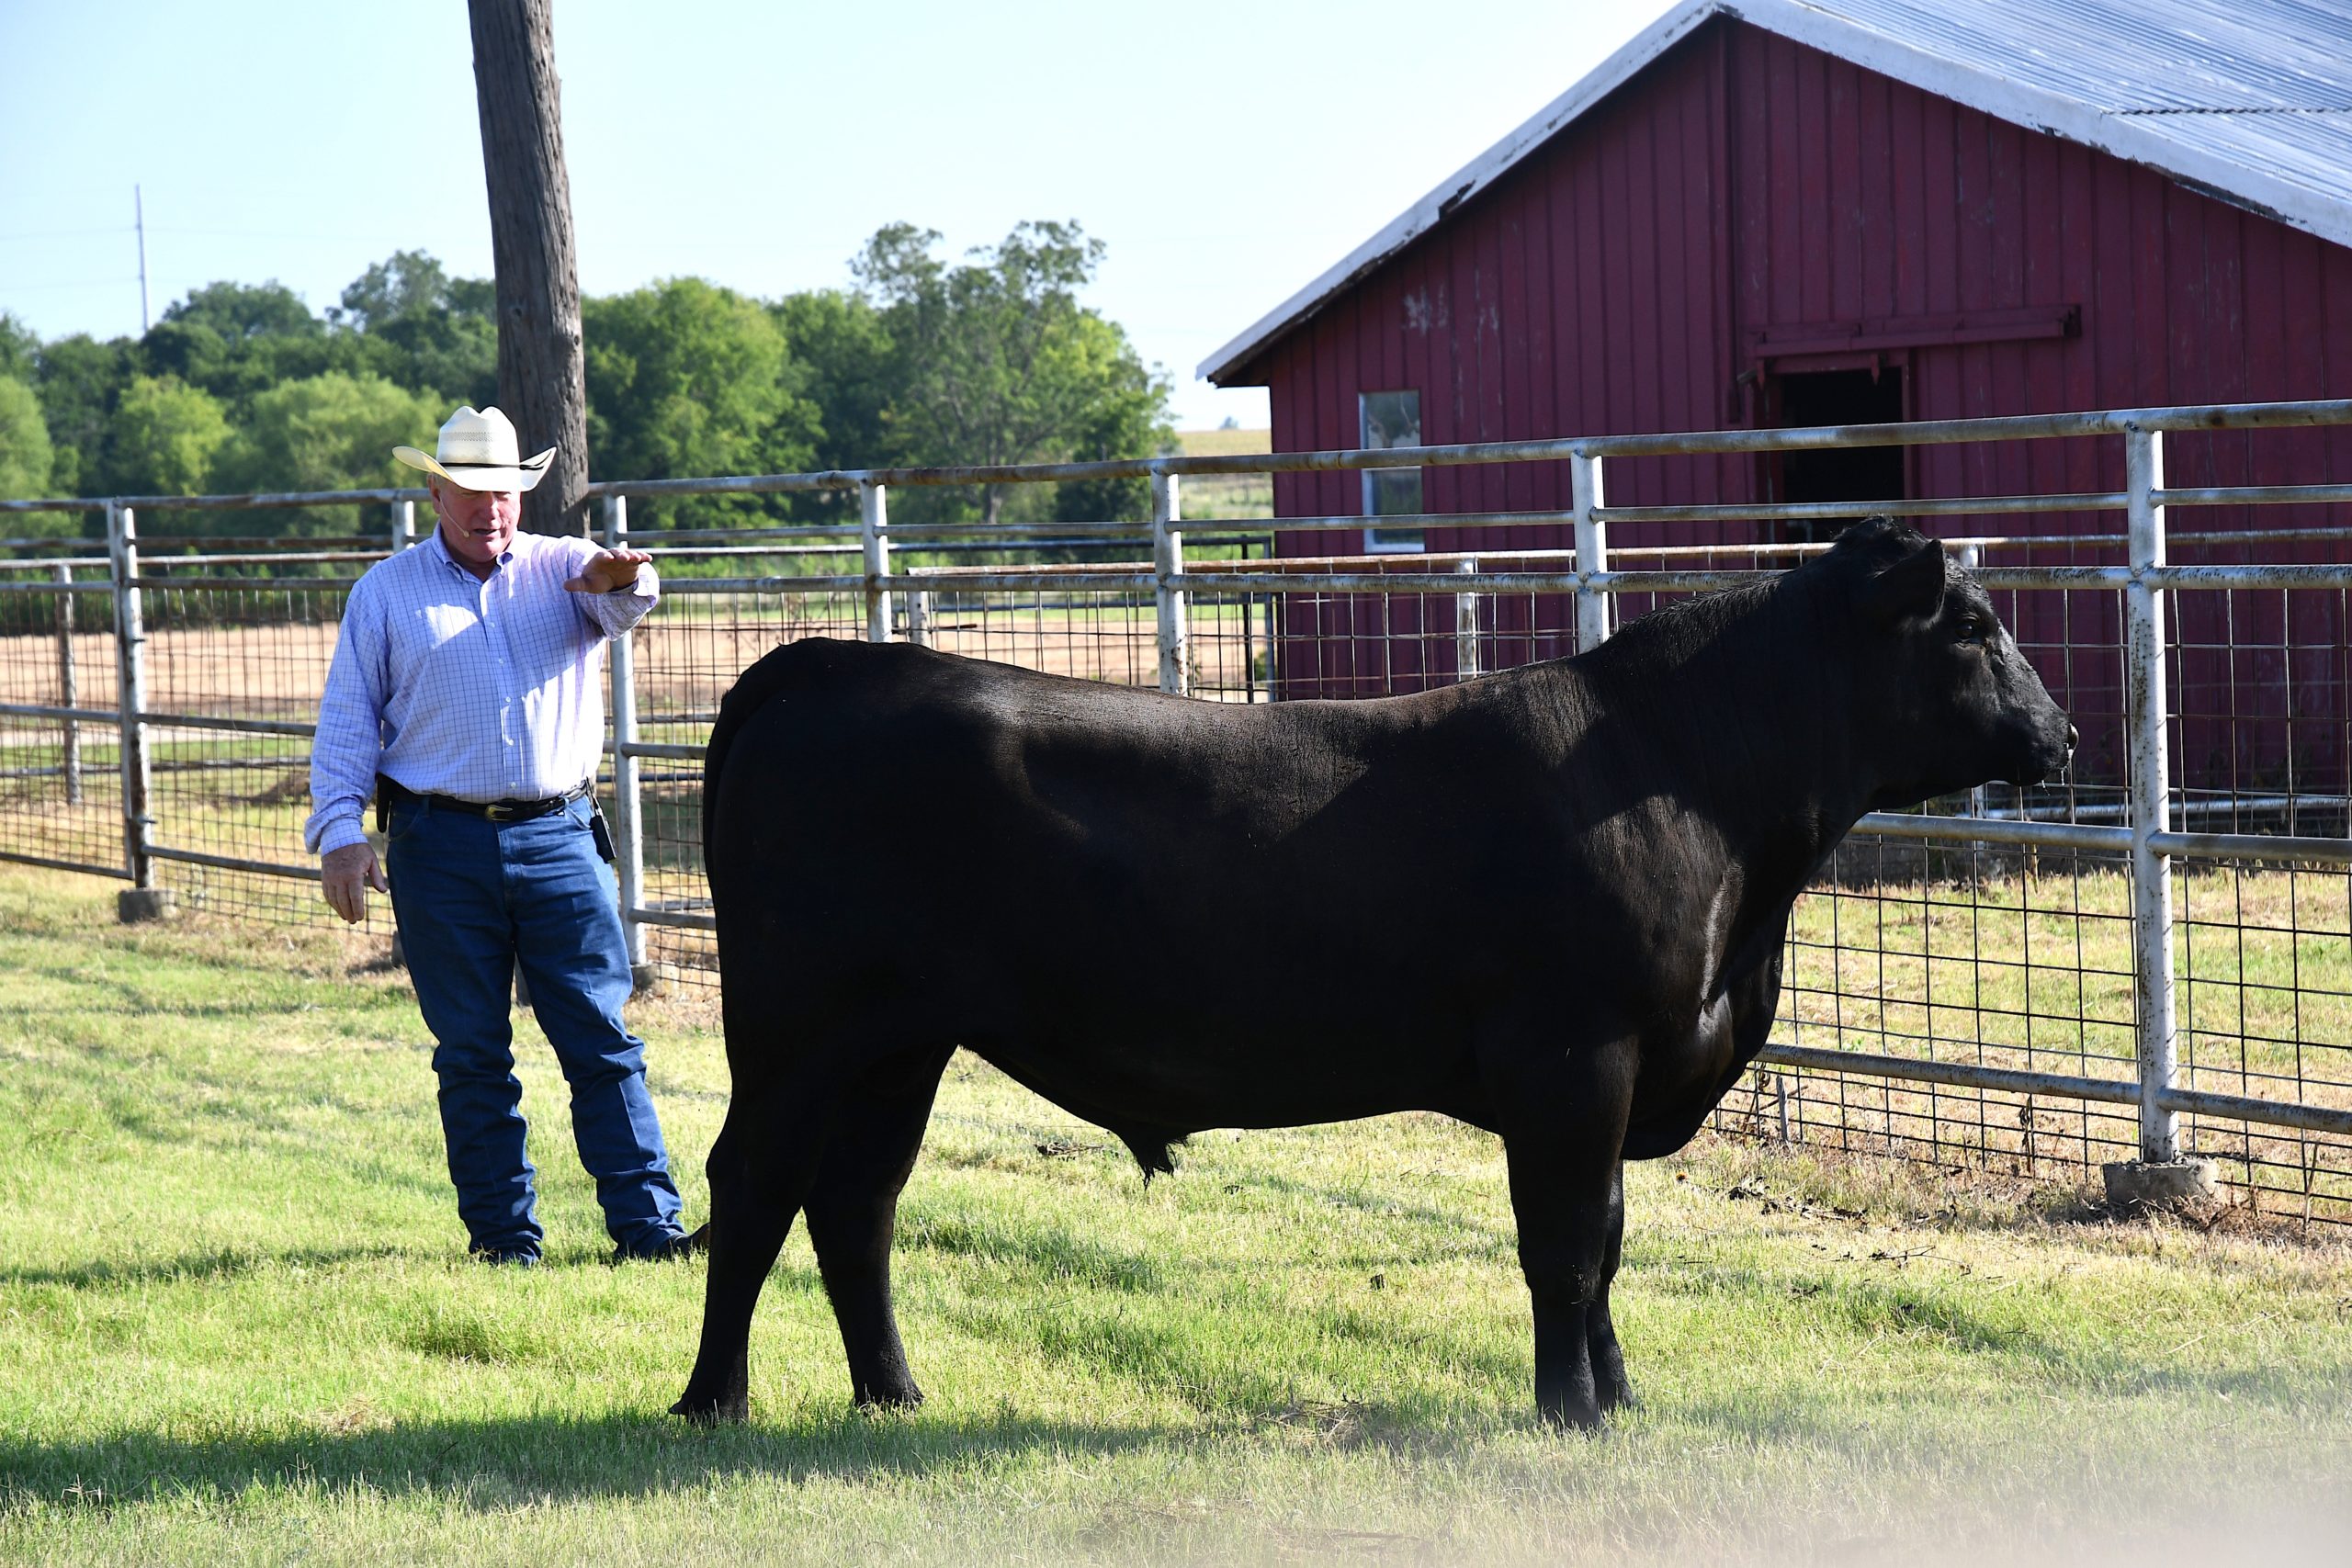 Keep an eye on the herd bull! by Dr. Mario A. Villarino, County Extension Agent for Agriculture and Natural Resources